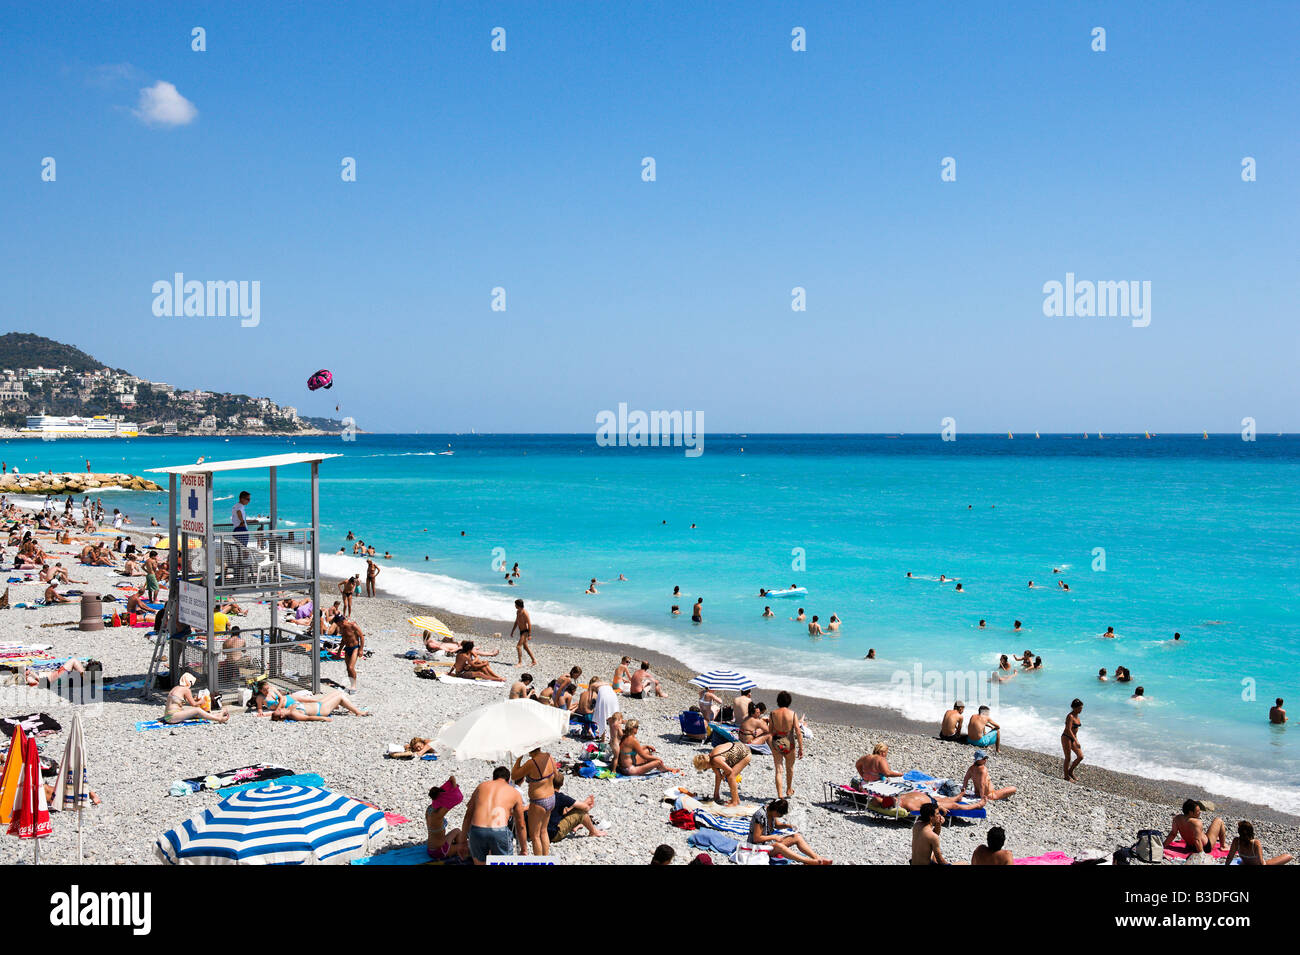 Promenade Des Anglais High Resolution Stock Photography and Images - Alamy